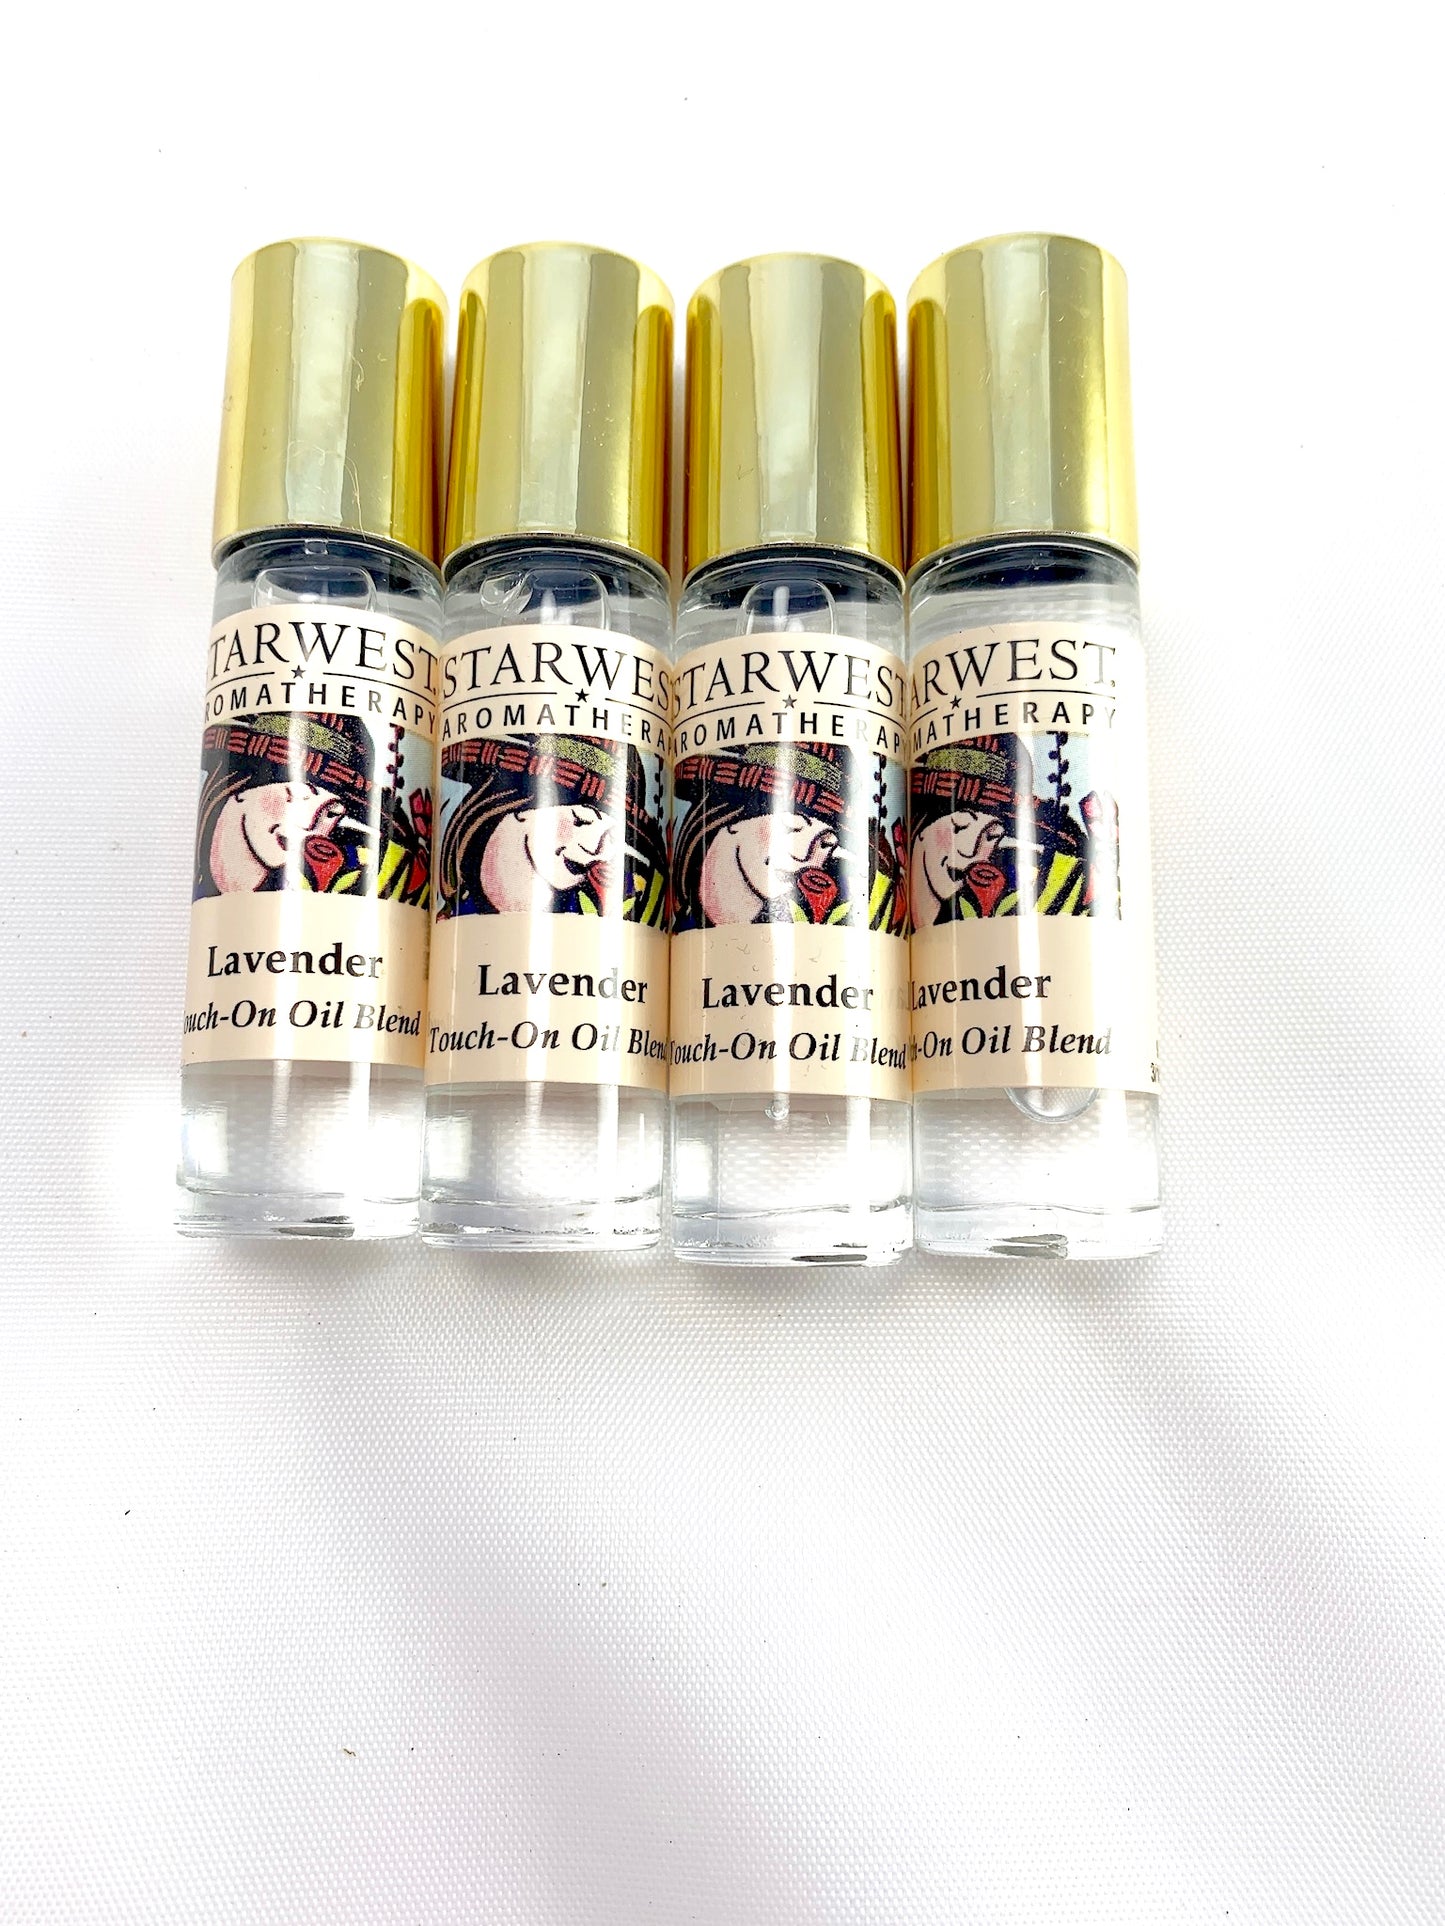 Organic Lavender Oil Roll On by Starwest Botanicals